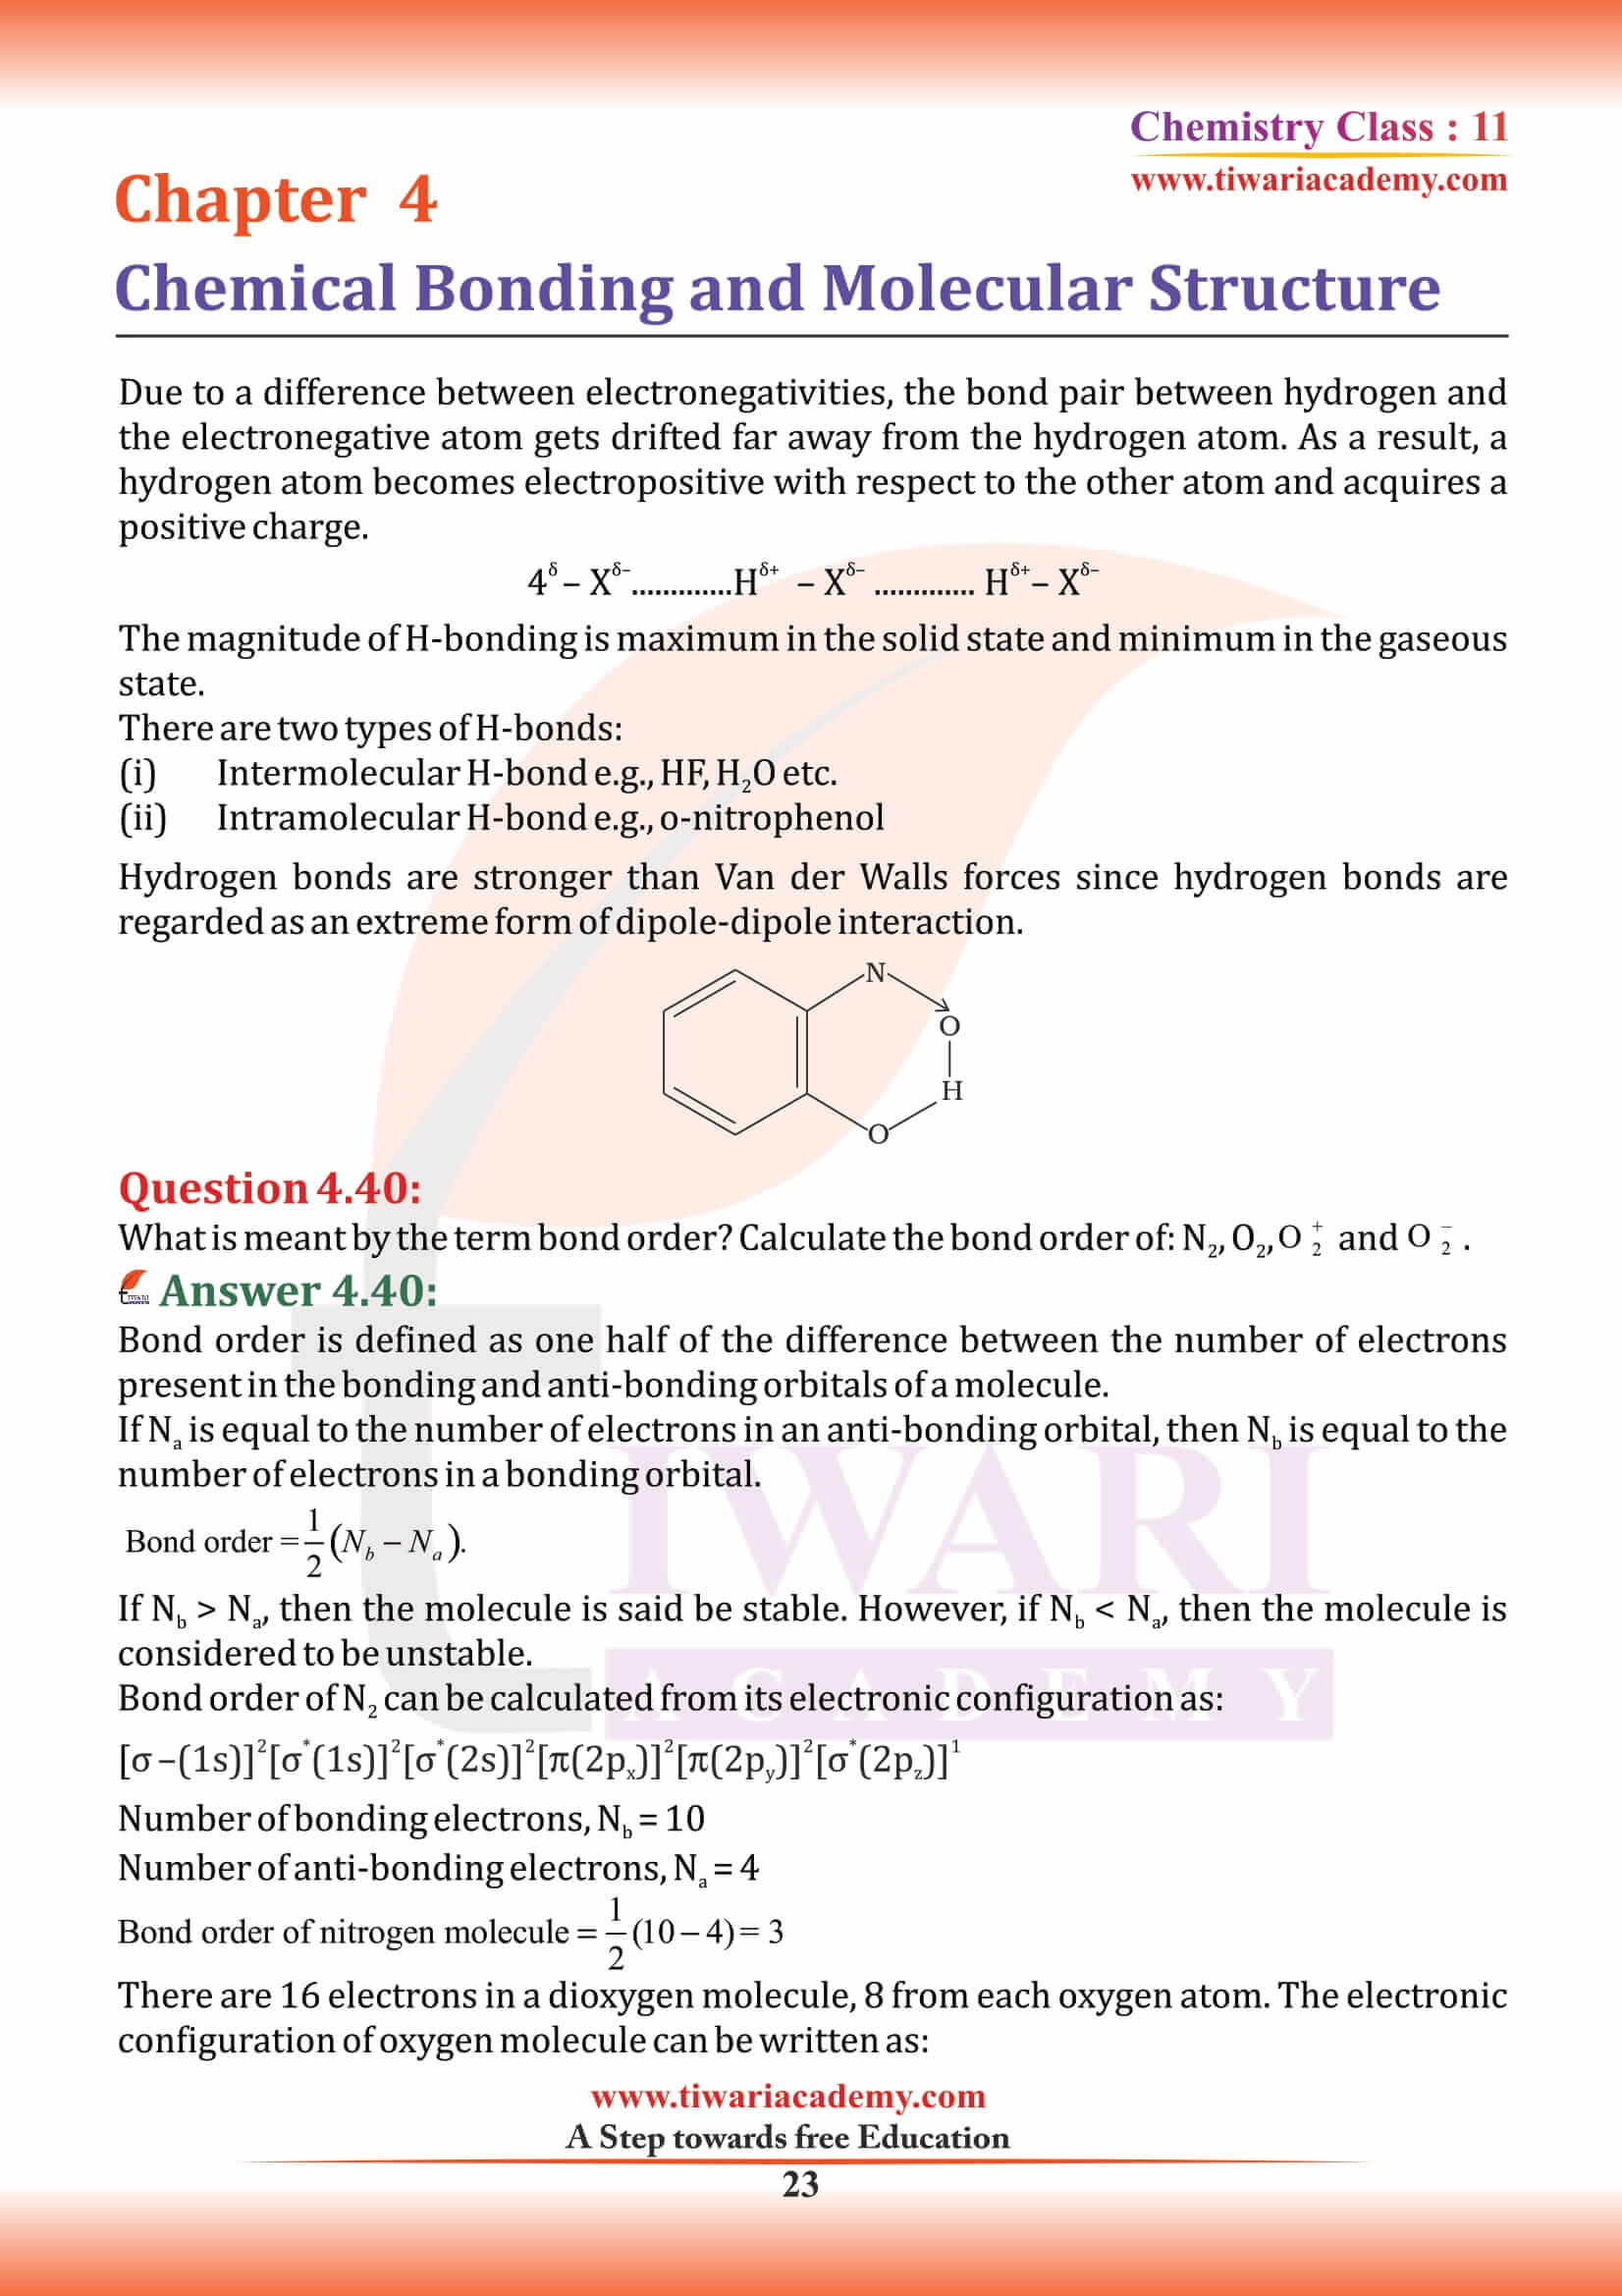 Class 11 Chemistry Chapter 4 for up board